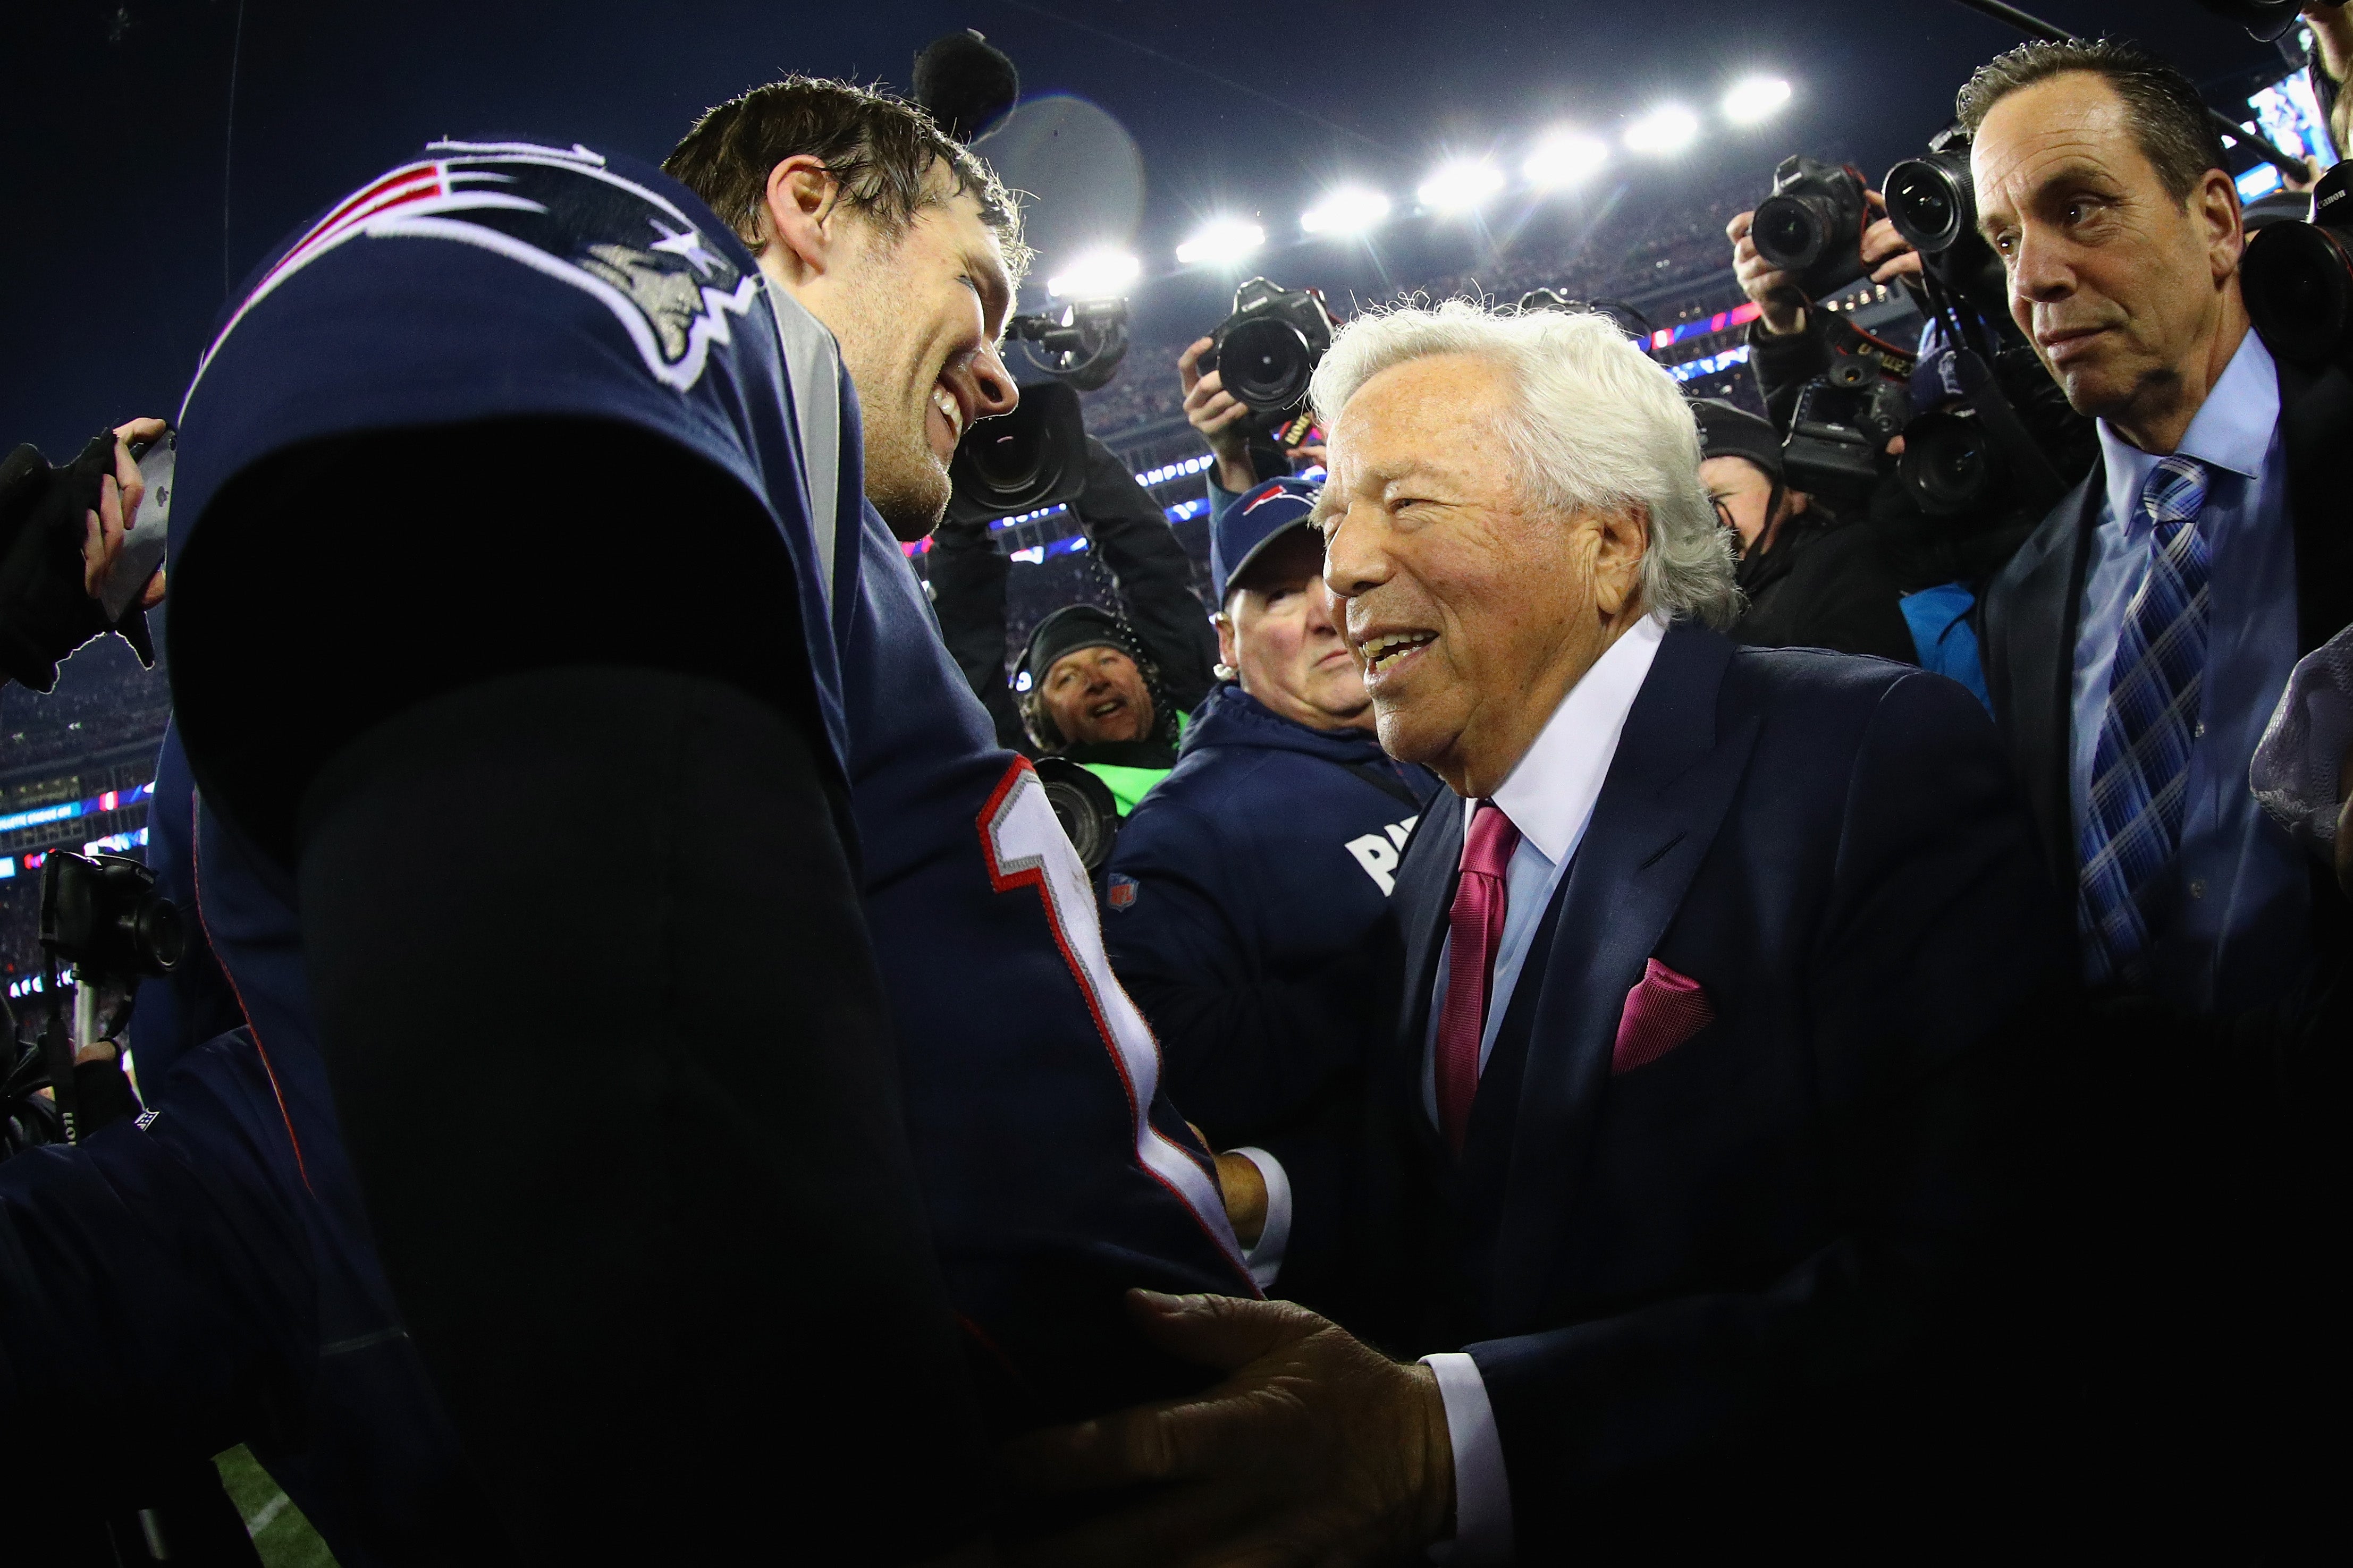 Tom Brady celebrates with Patriots owner Robert Kraft after winning the AFC Championship Game against the Jacksonville Jaguars at Gillette Stadium on 21 January 2018